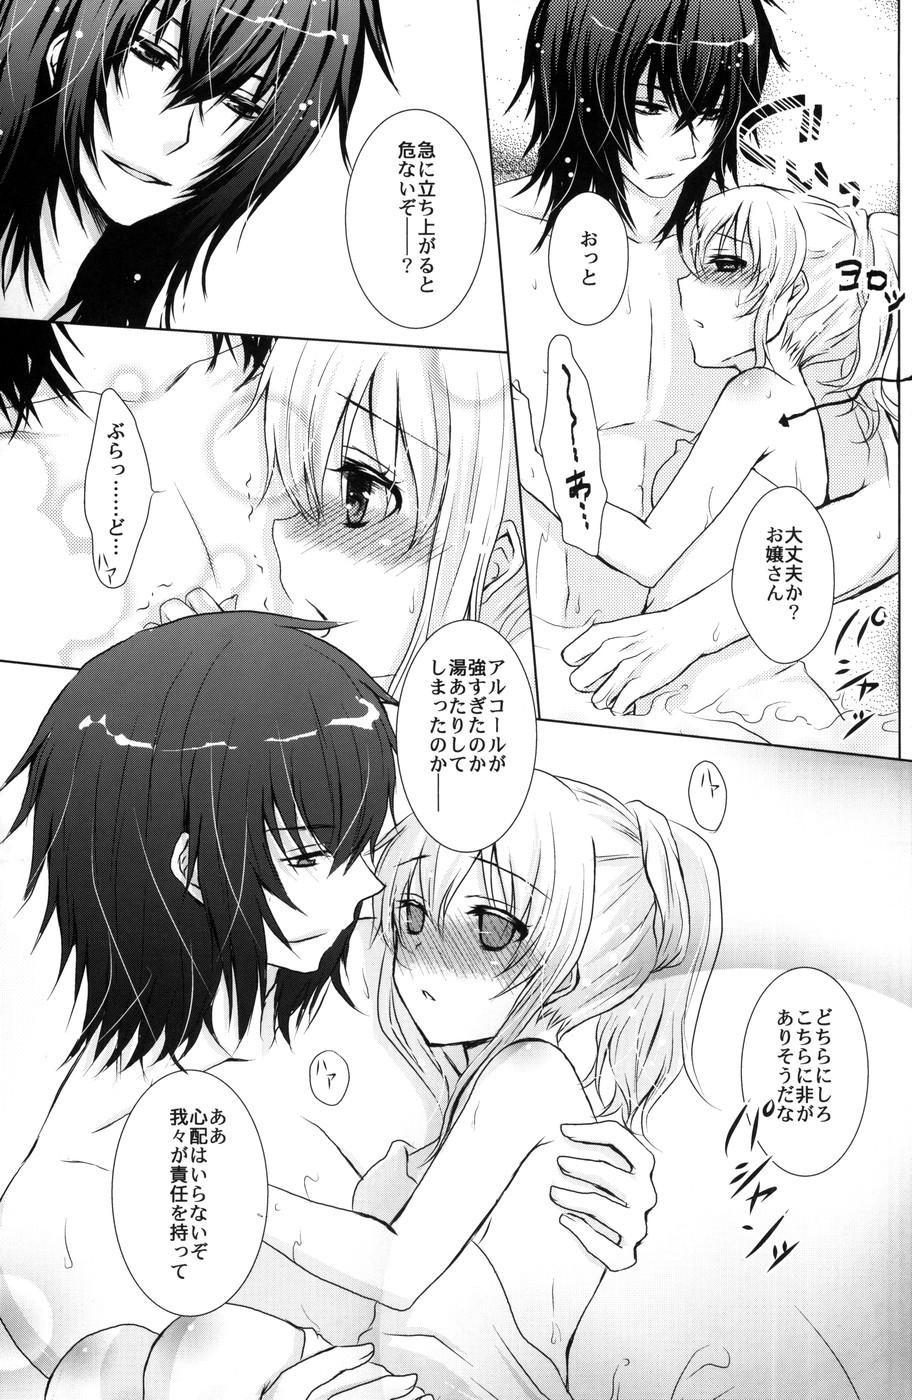 Monster Dick Boushiya x Alice x Sangatsu Usagi no Hon - Alice in the country of hearts Blowjob Contest - Page 6